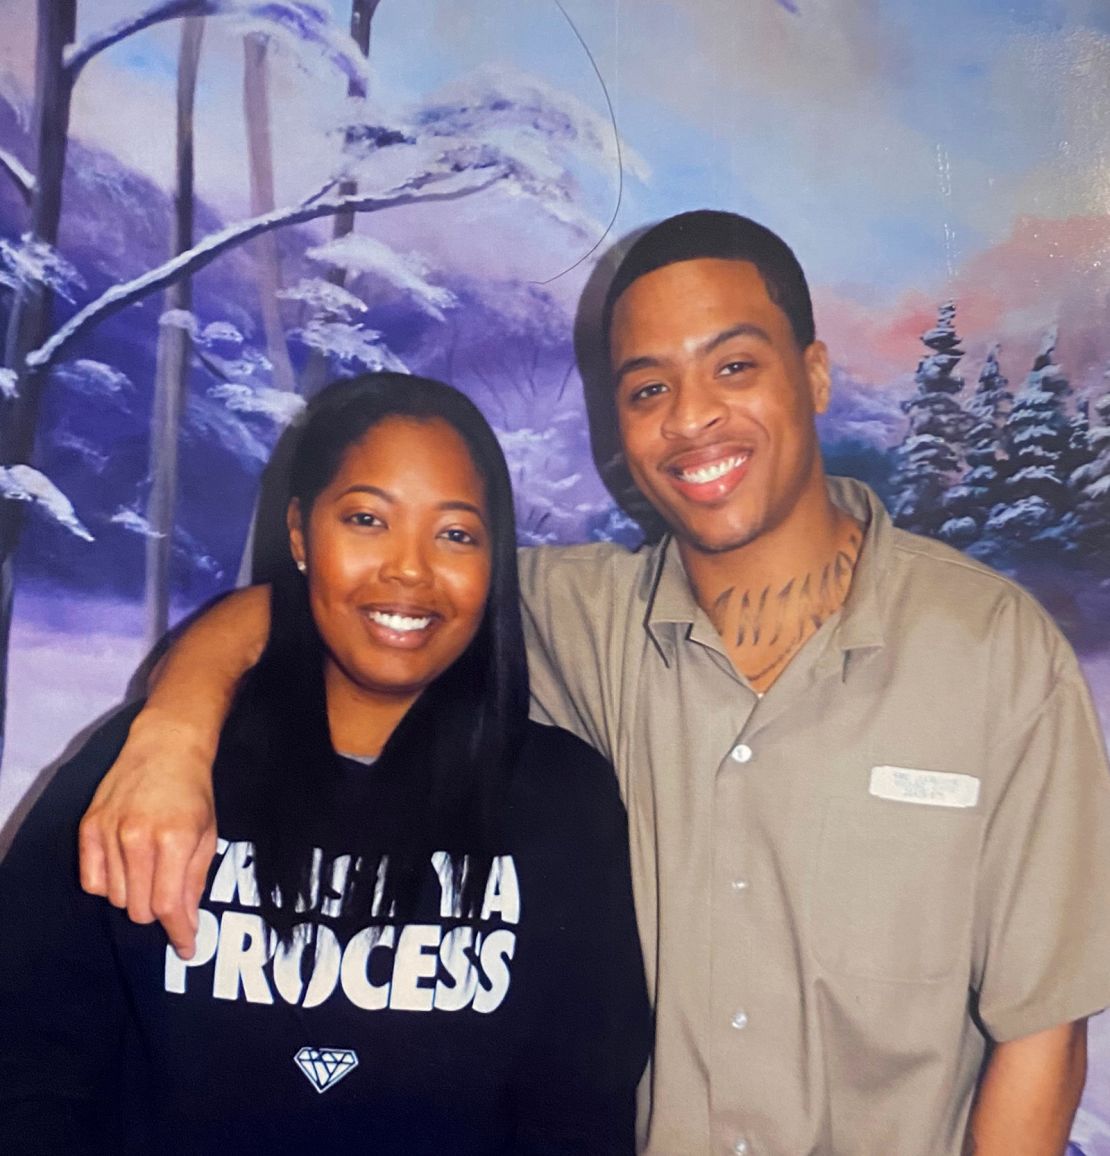 Brittany Barnett meets with Young, her client, in this undated photo from his time in prison.